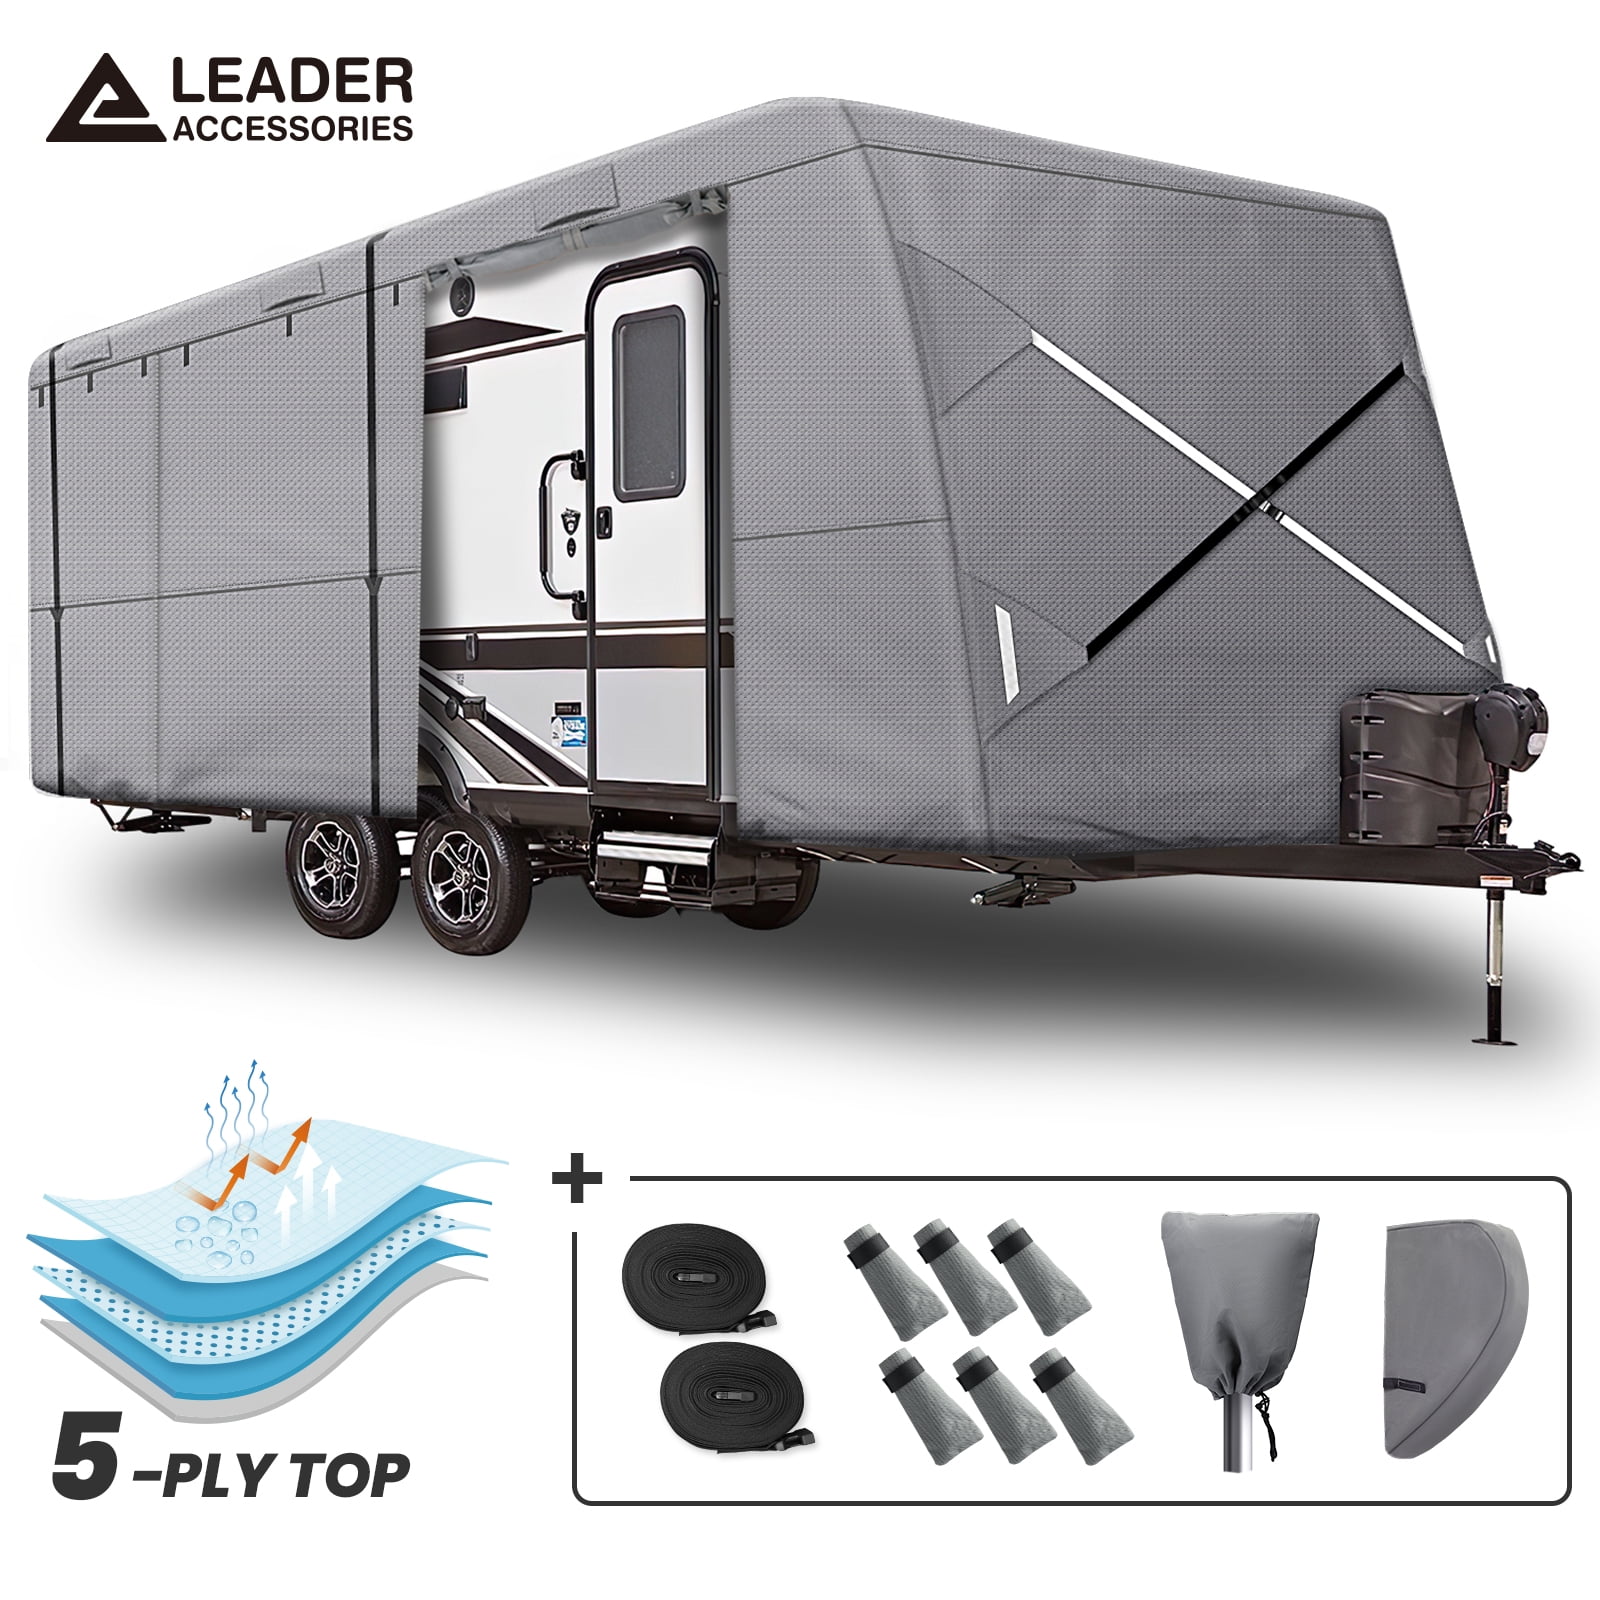 Leader Accessories Travel Trailer RV Cover Fits 27-30 Camper White 3 Layer Top with All Weather With Windproof Straps and Buckles & Adhesive Repair Patch 